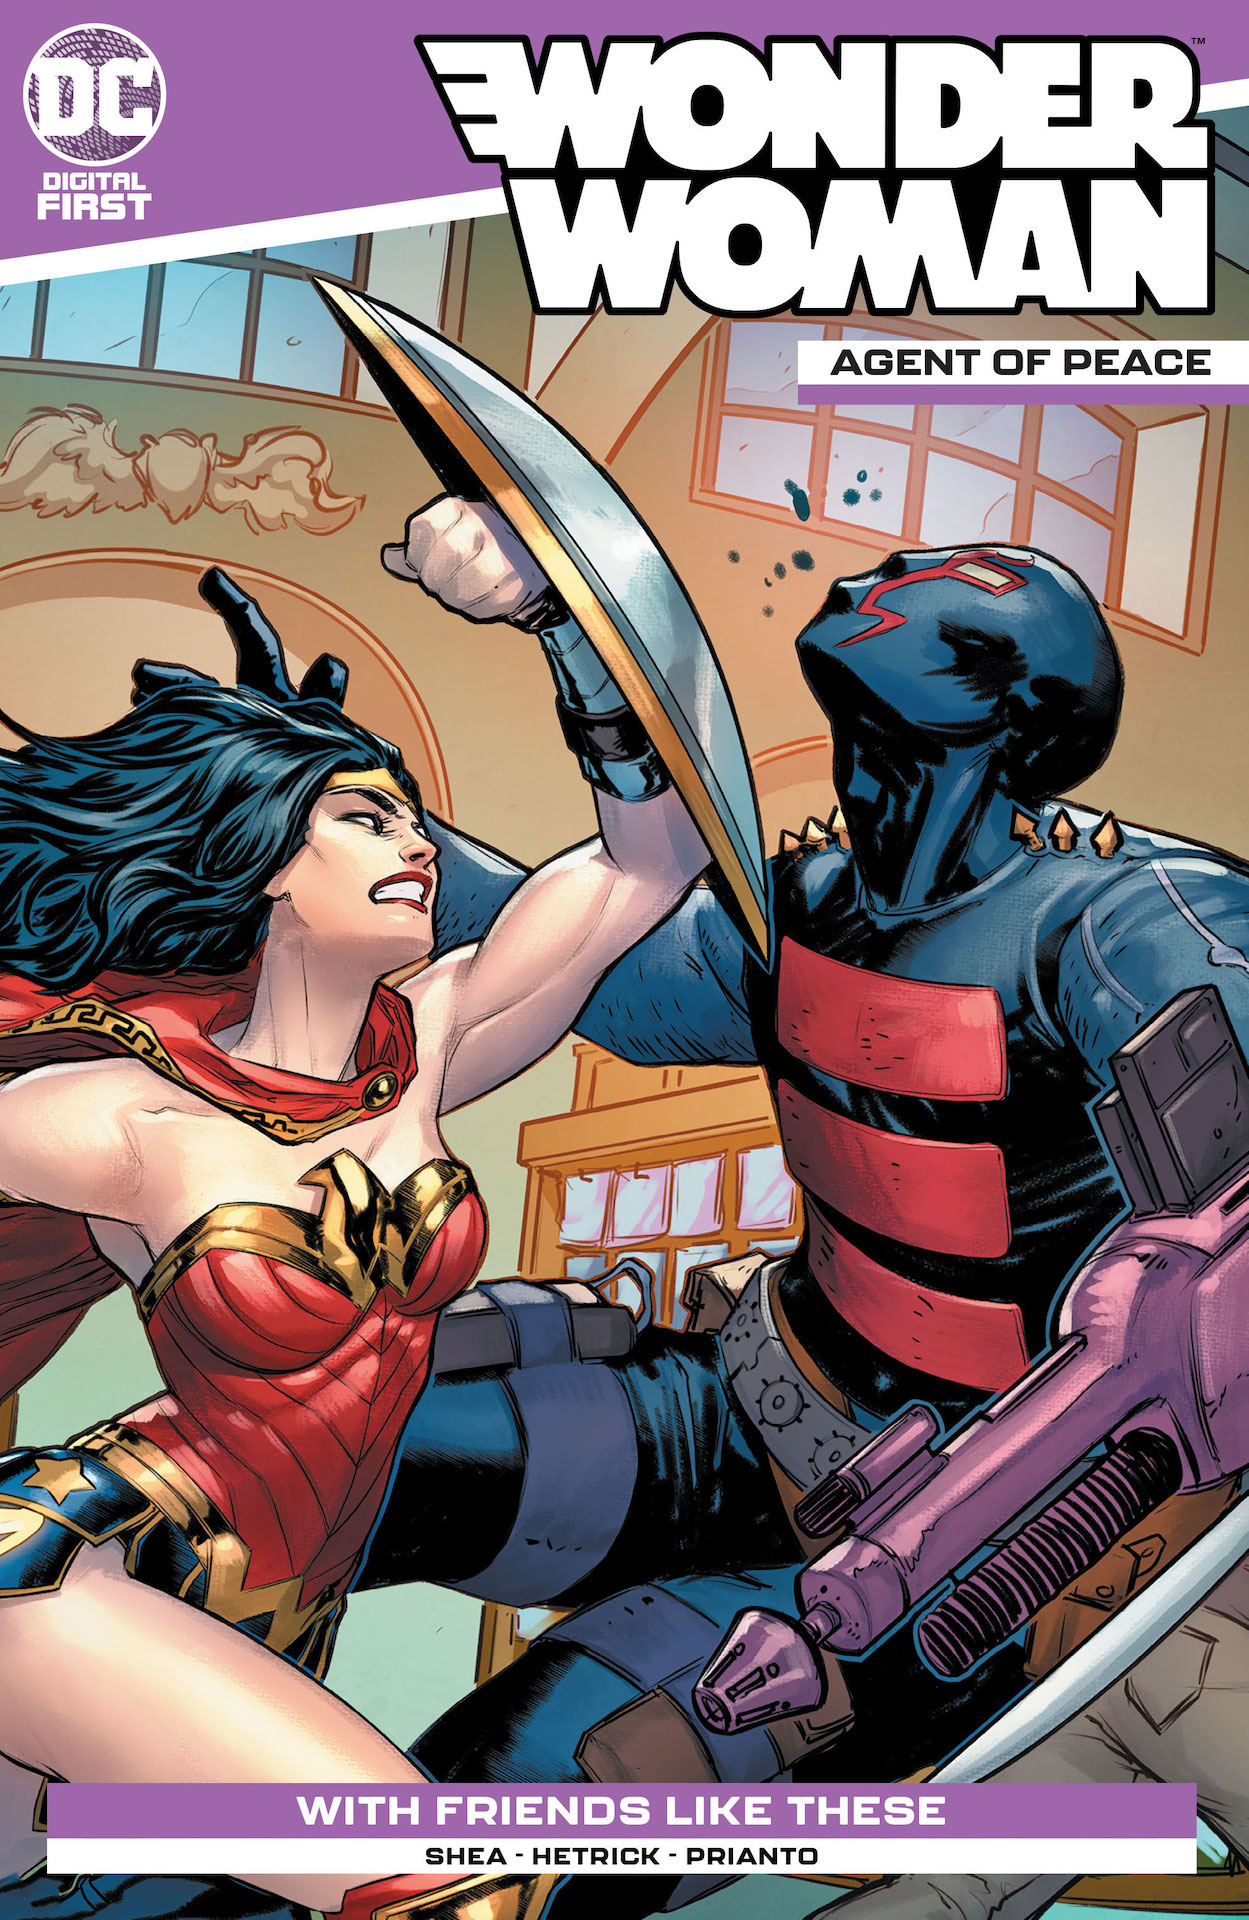 DC Preview: Wonder Woman: Agent of Peace #7